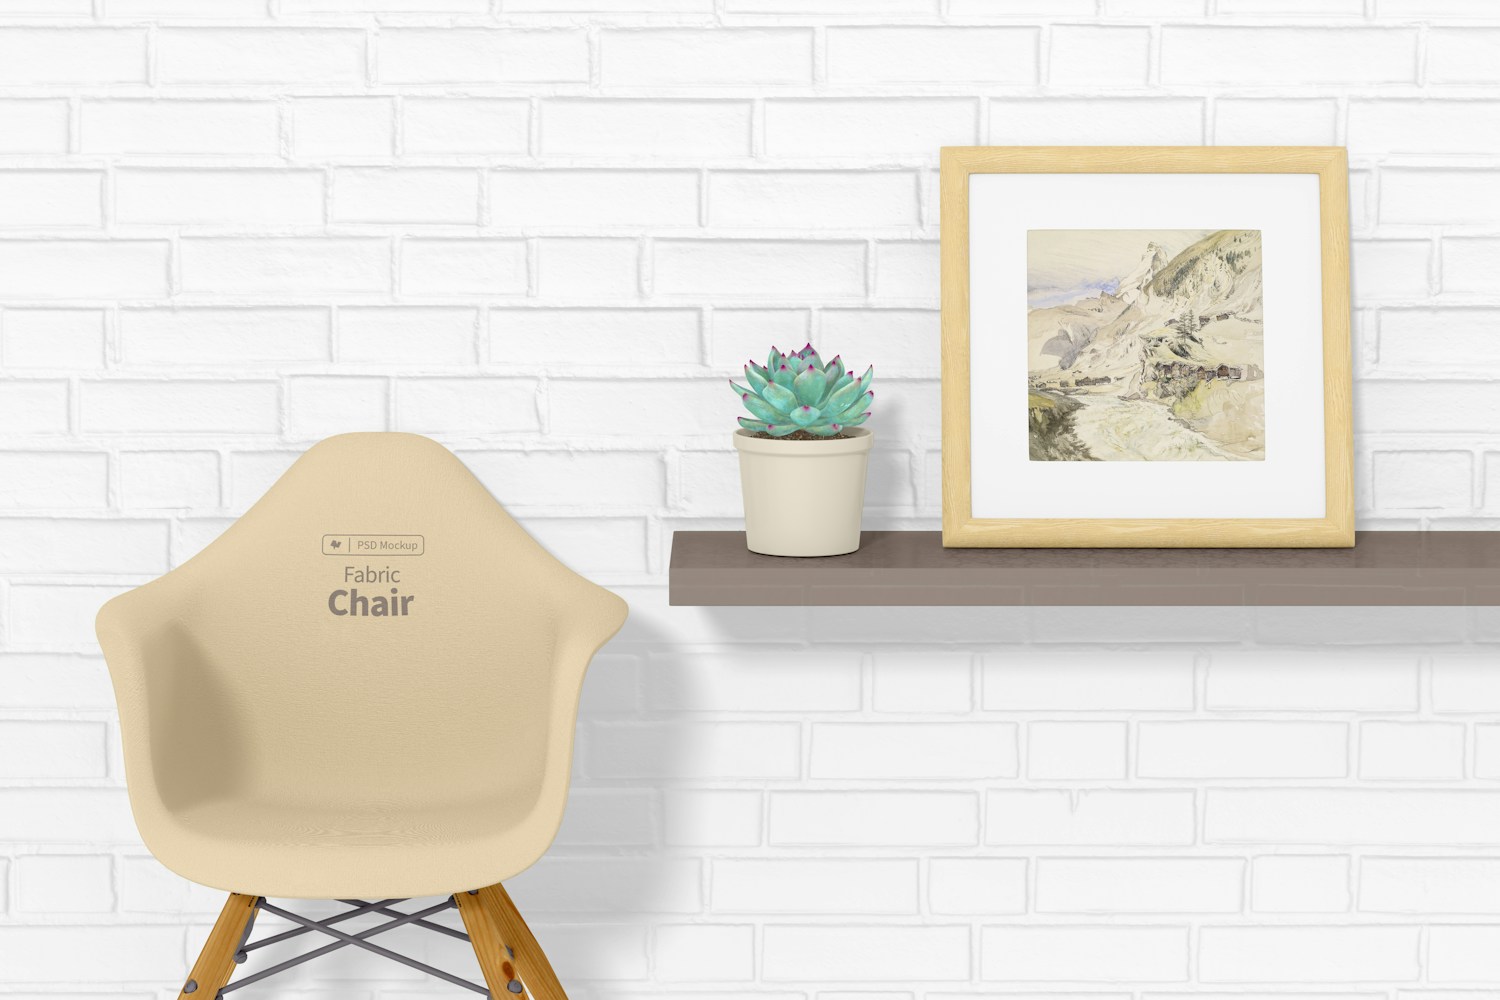 Square Frame on a Shelf with Fabric Chair Mockup